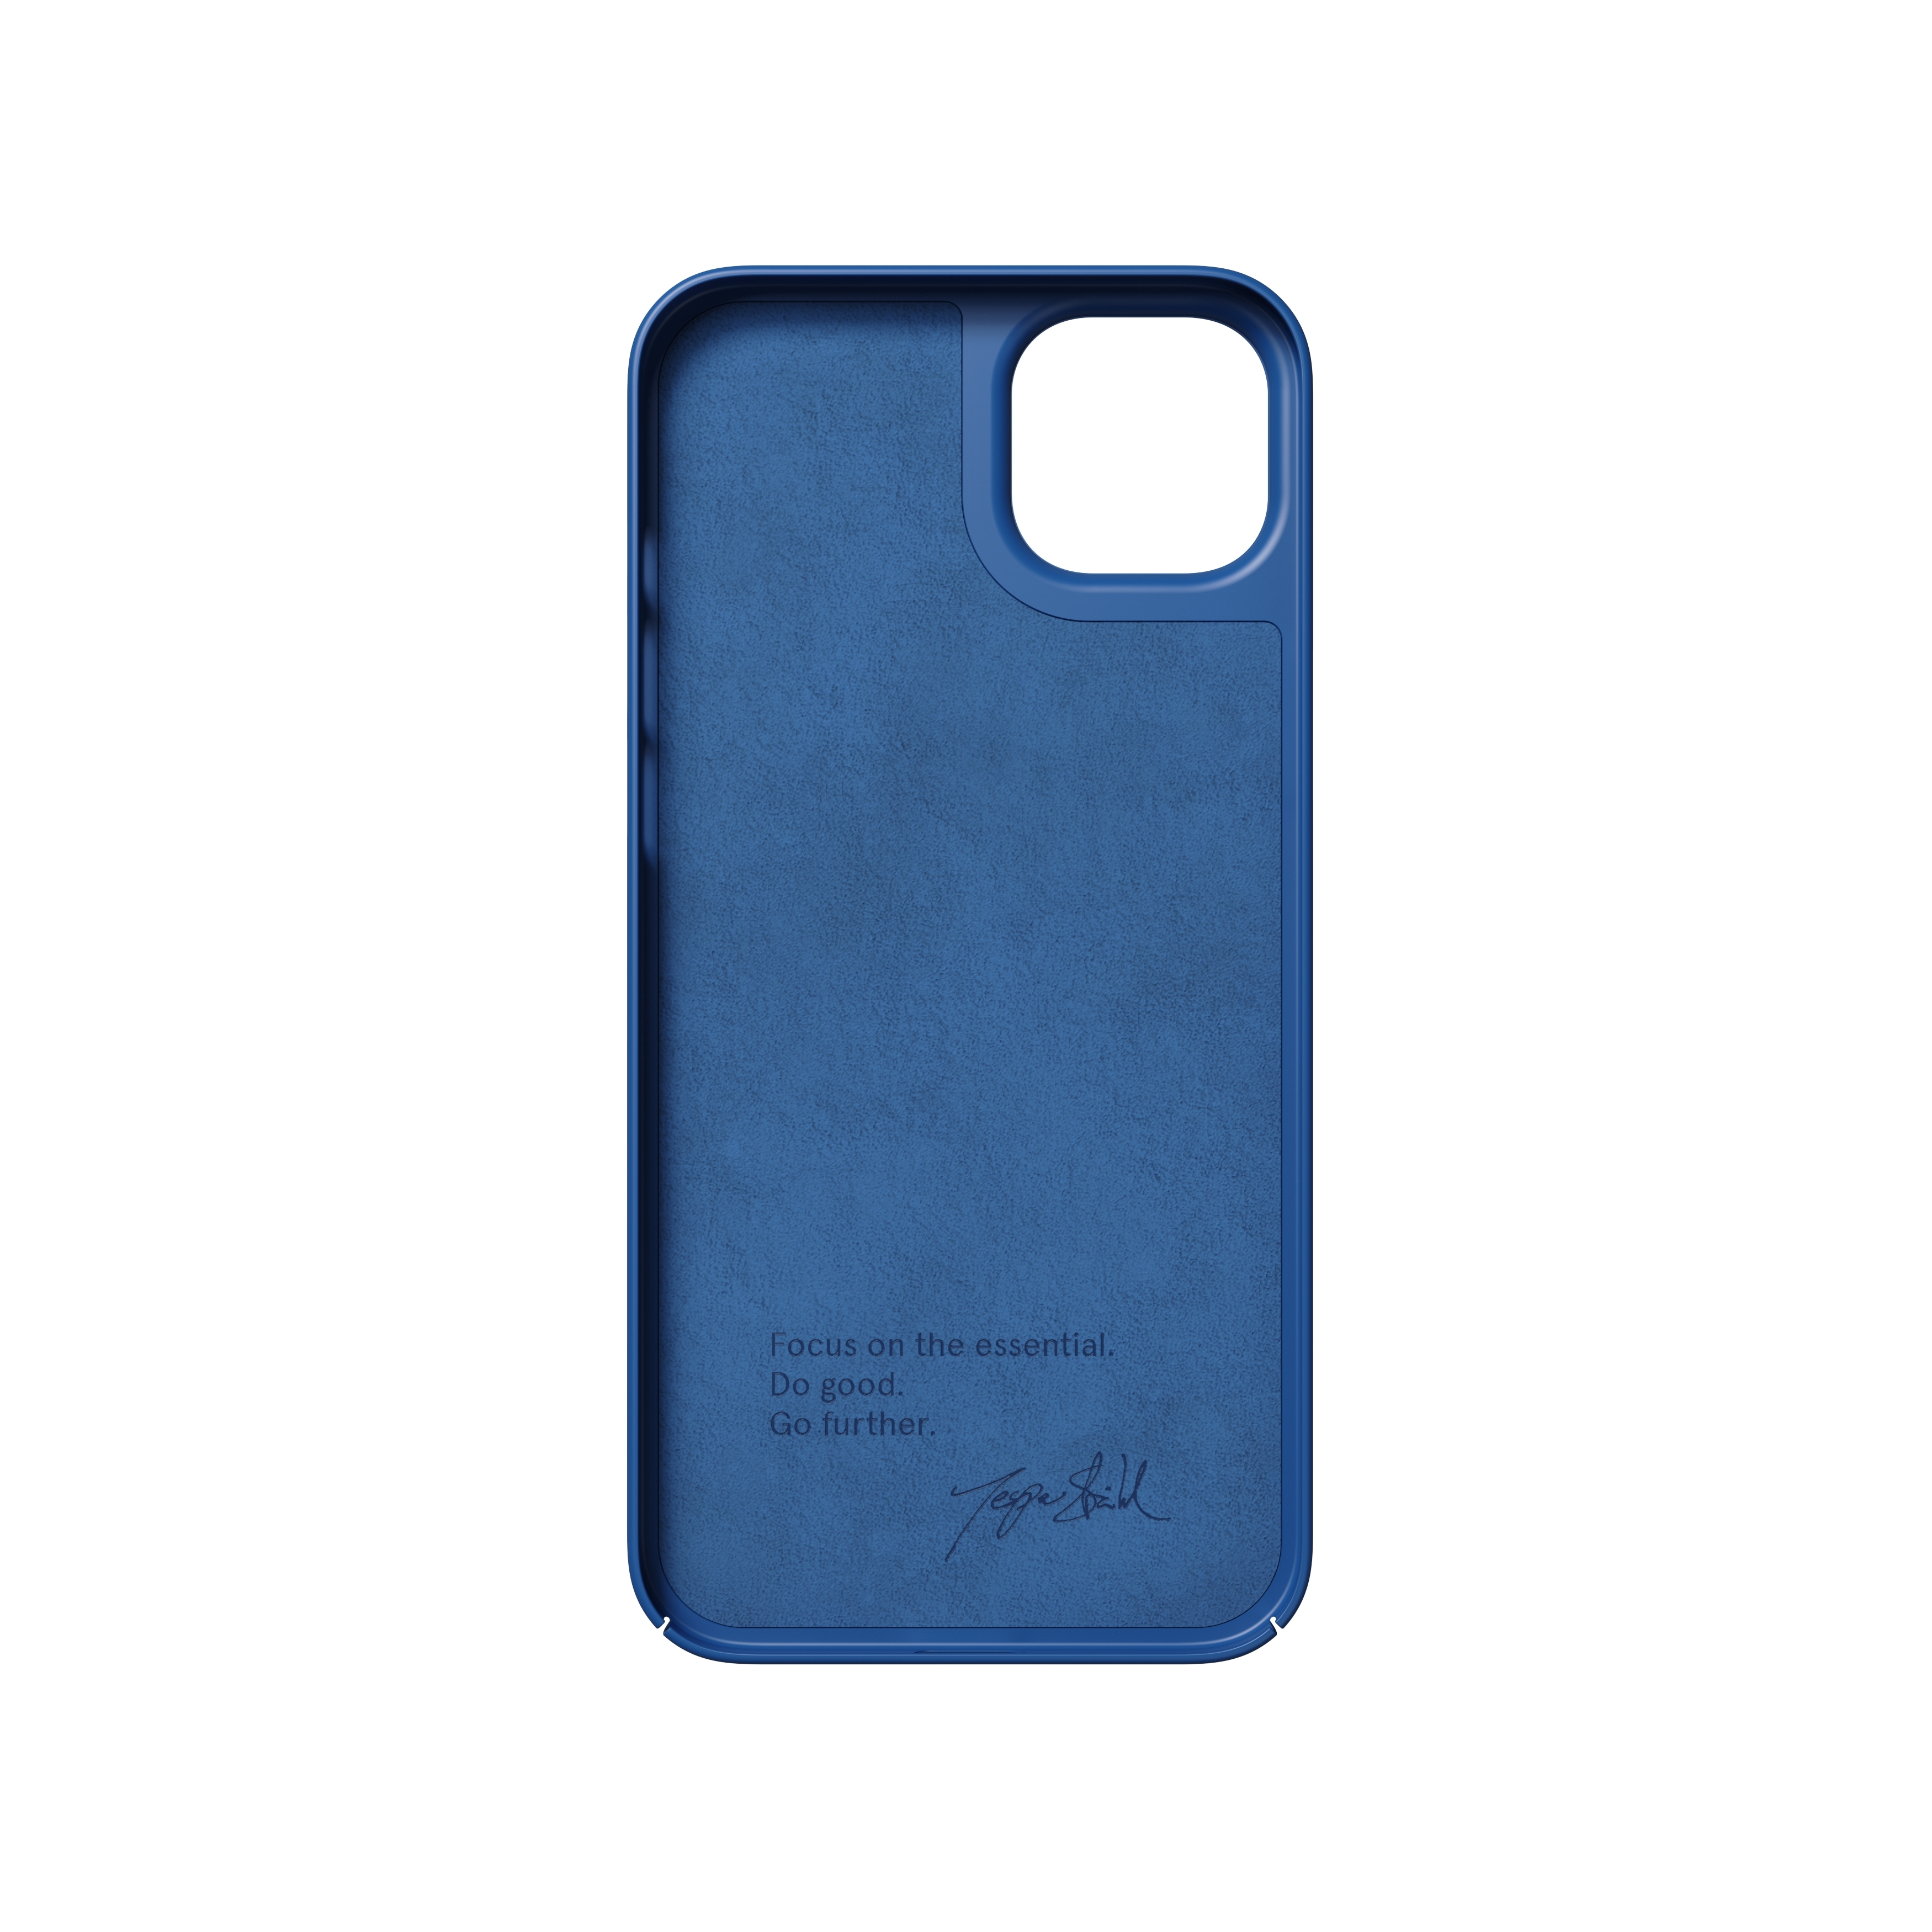 PLUS, NUDIENT 14 BLUE Backcover, Thin, IPHONE APPLE,